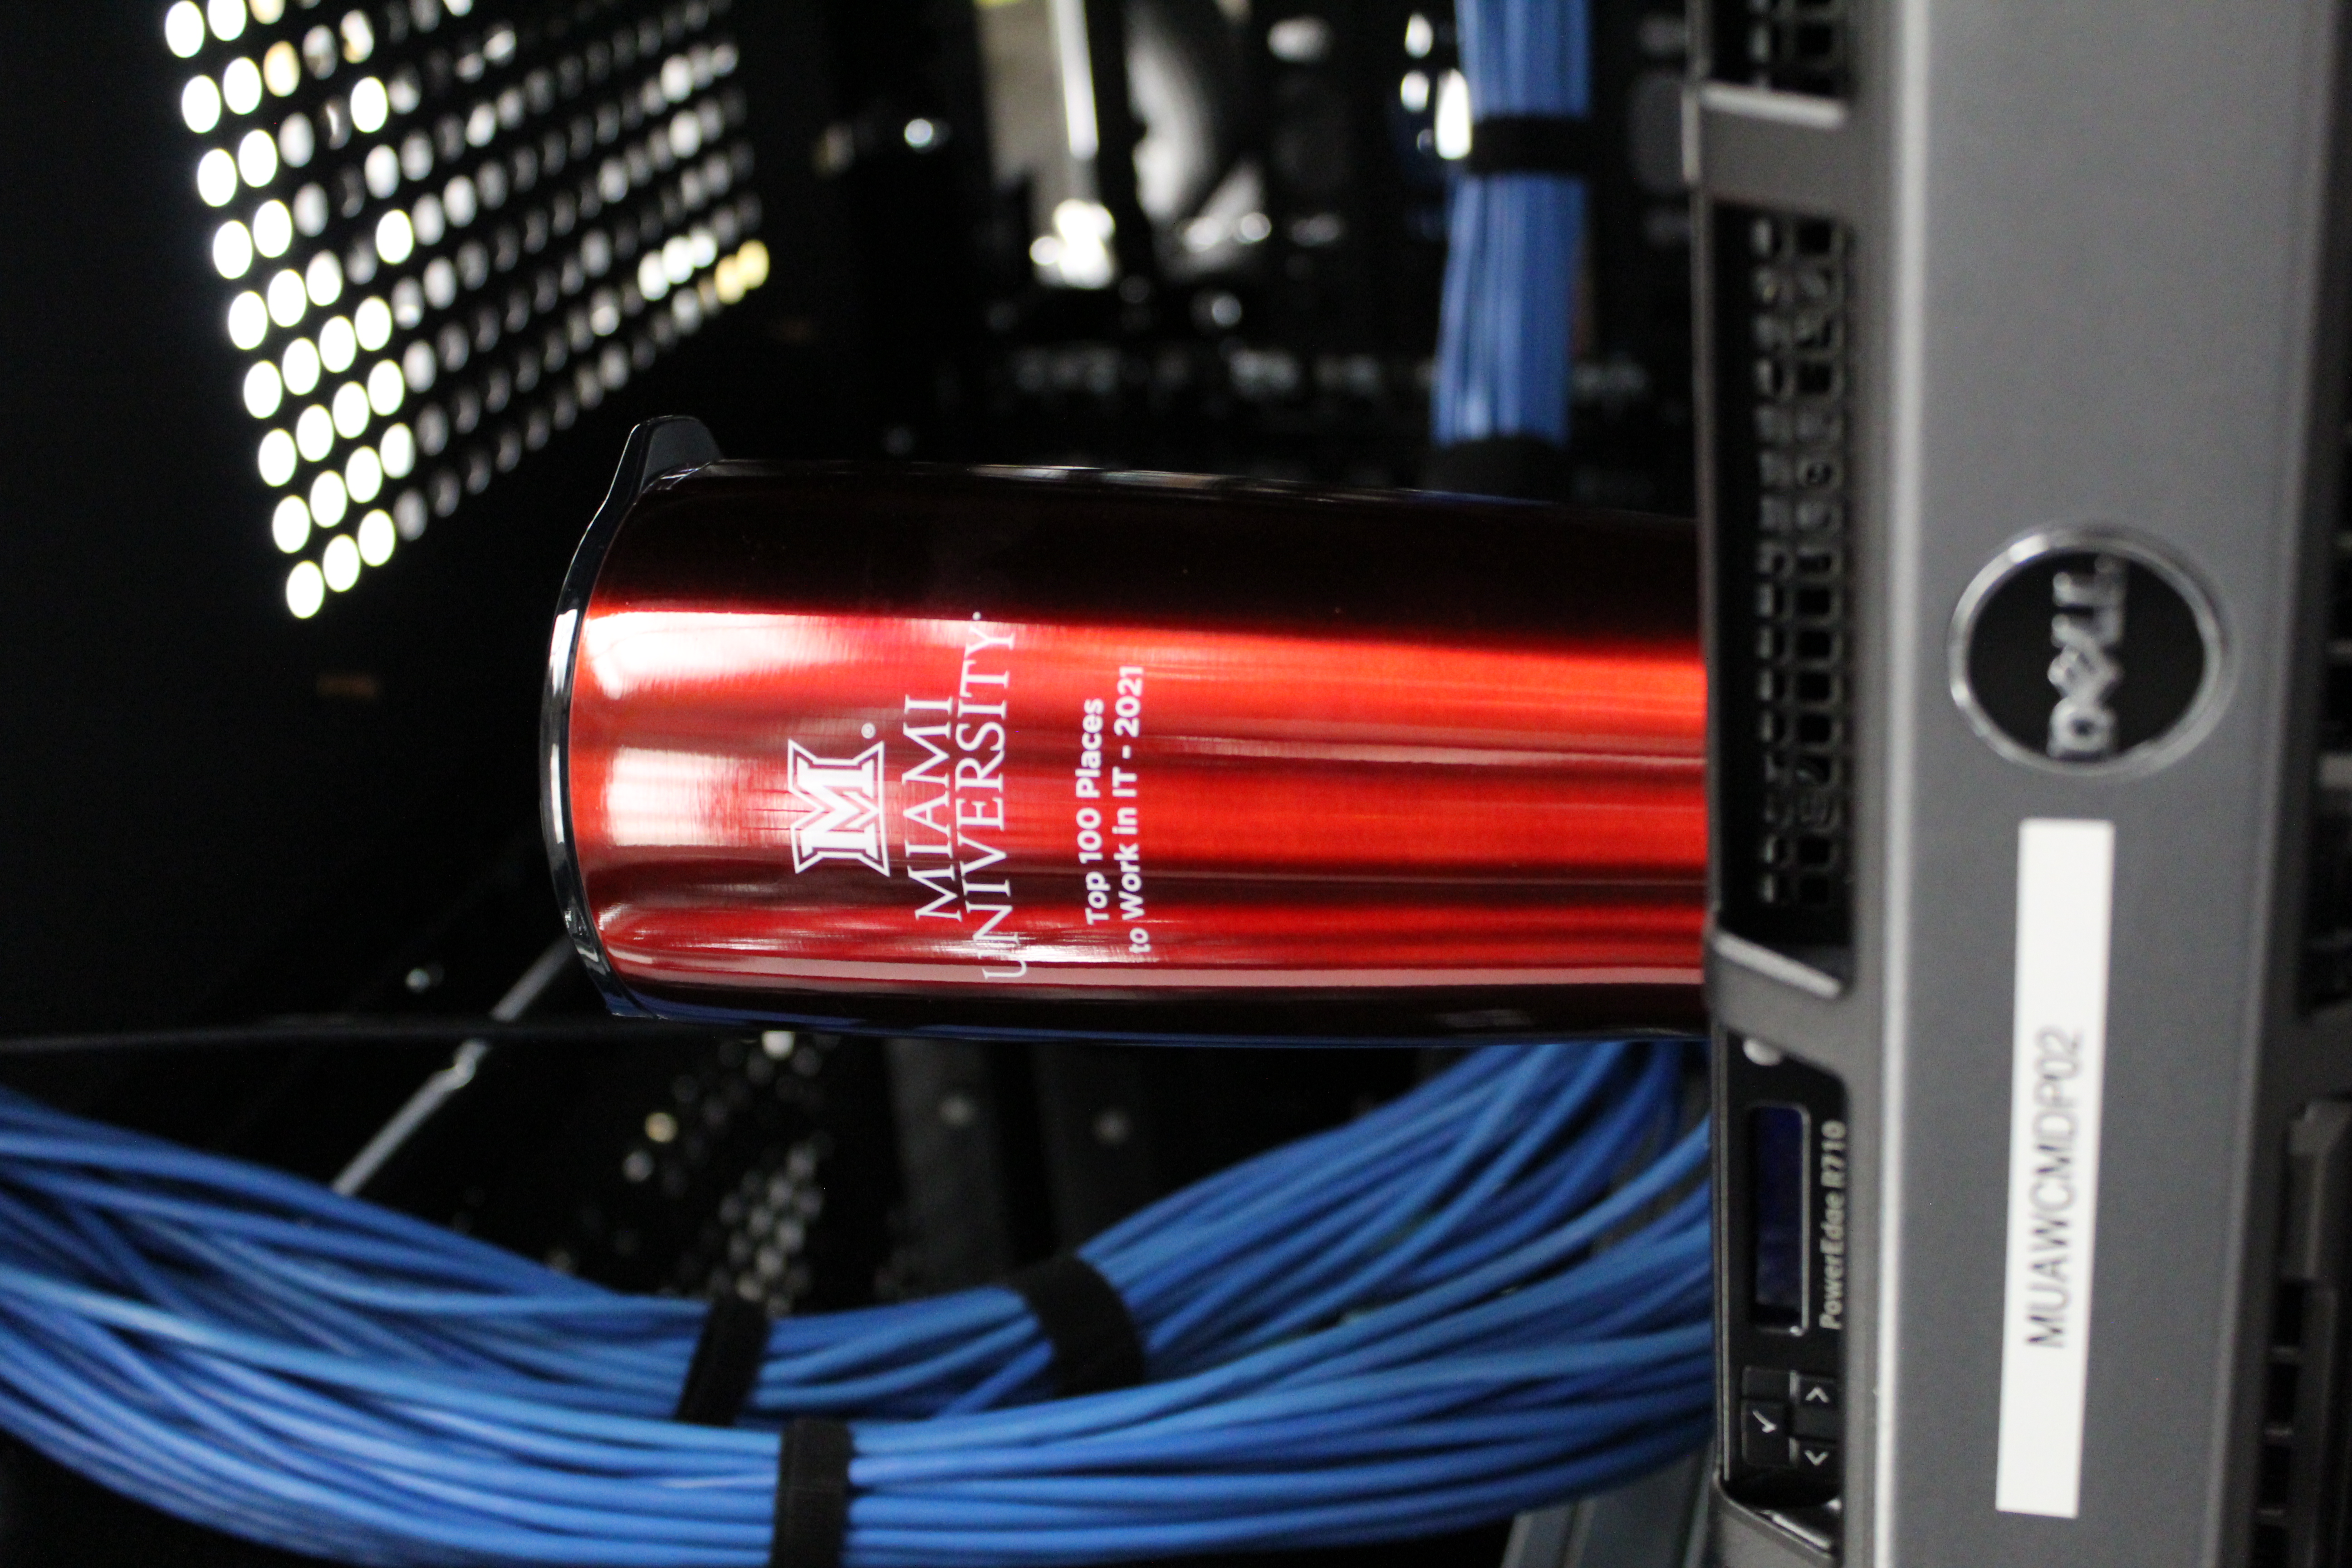 A red beverage tumbler sitting in a server in the Data Center